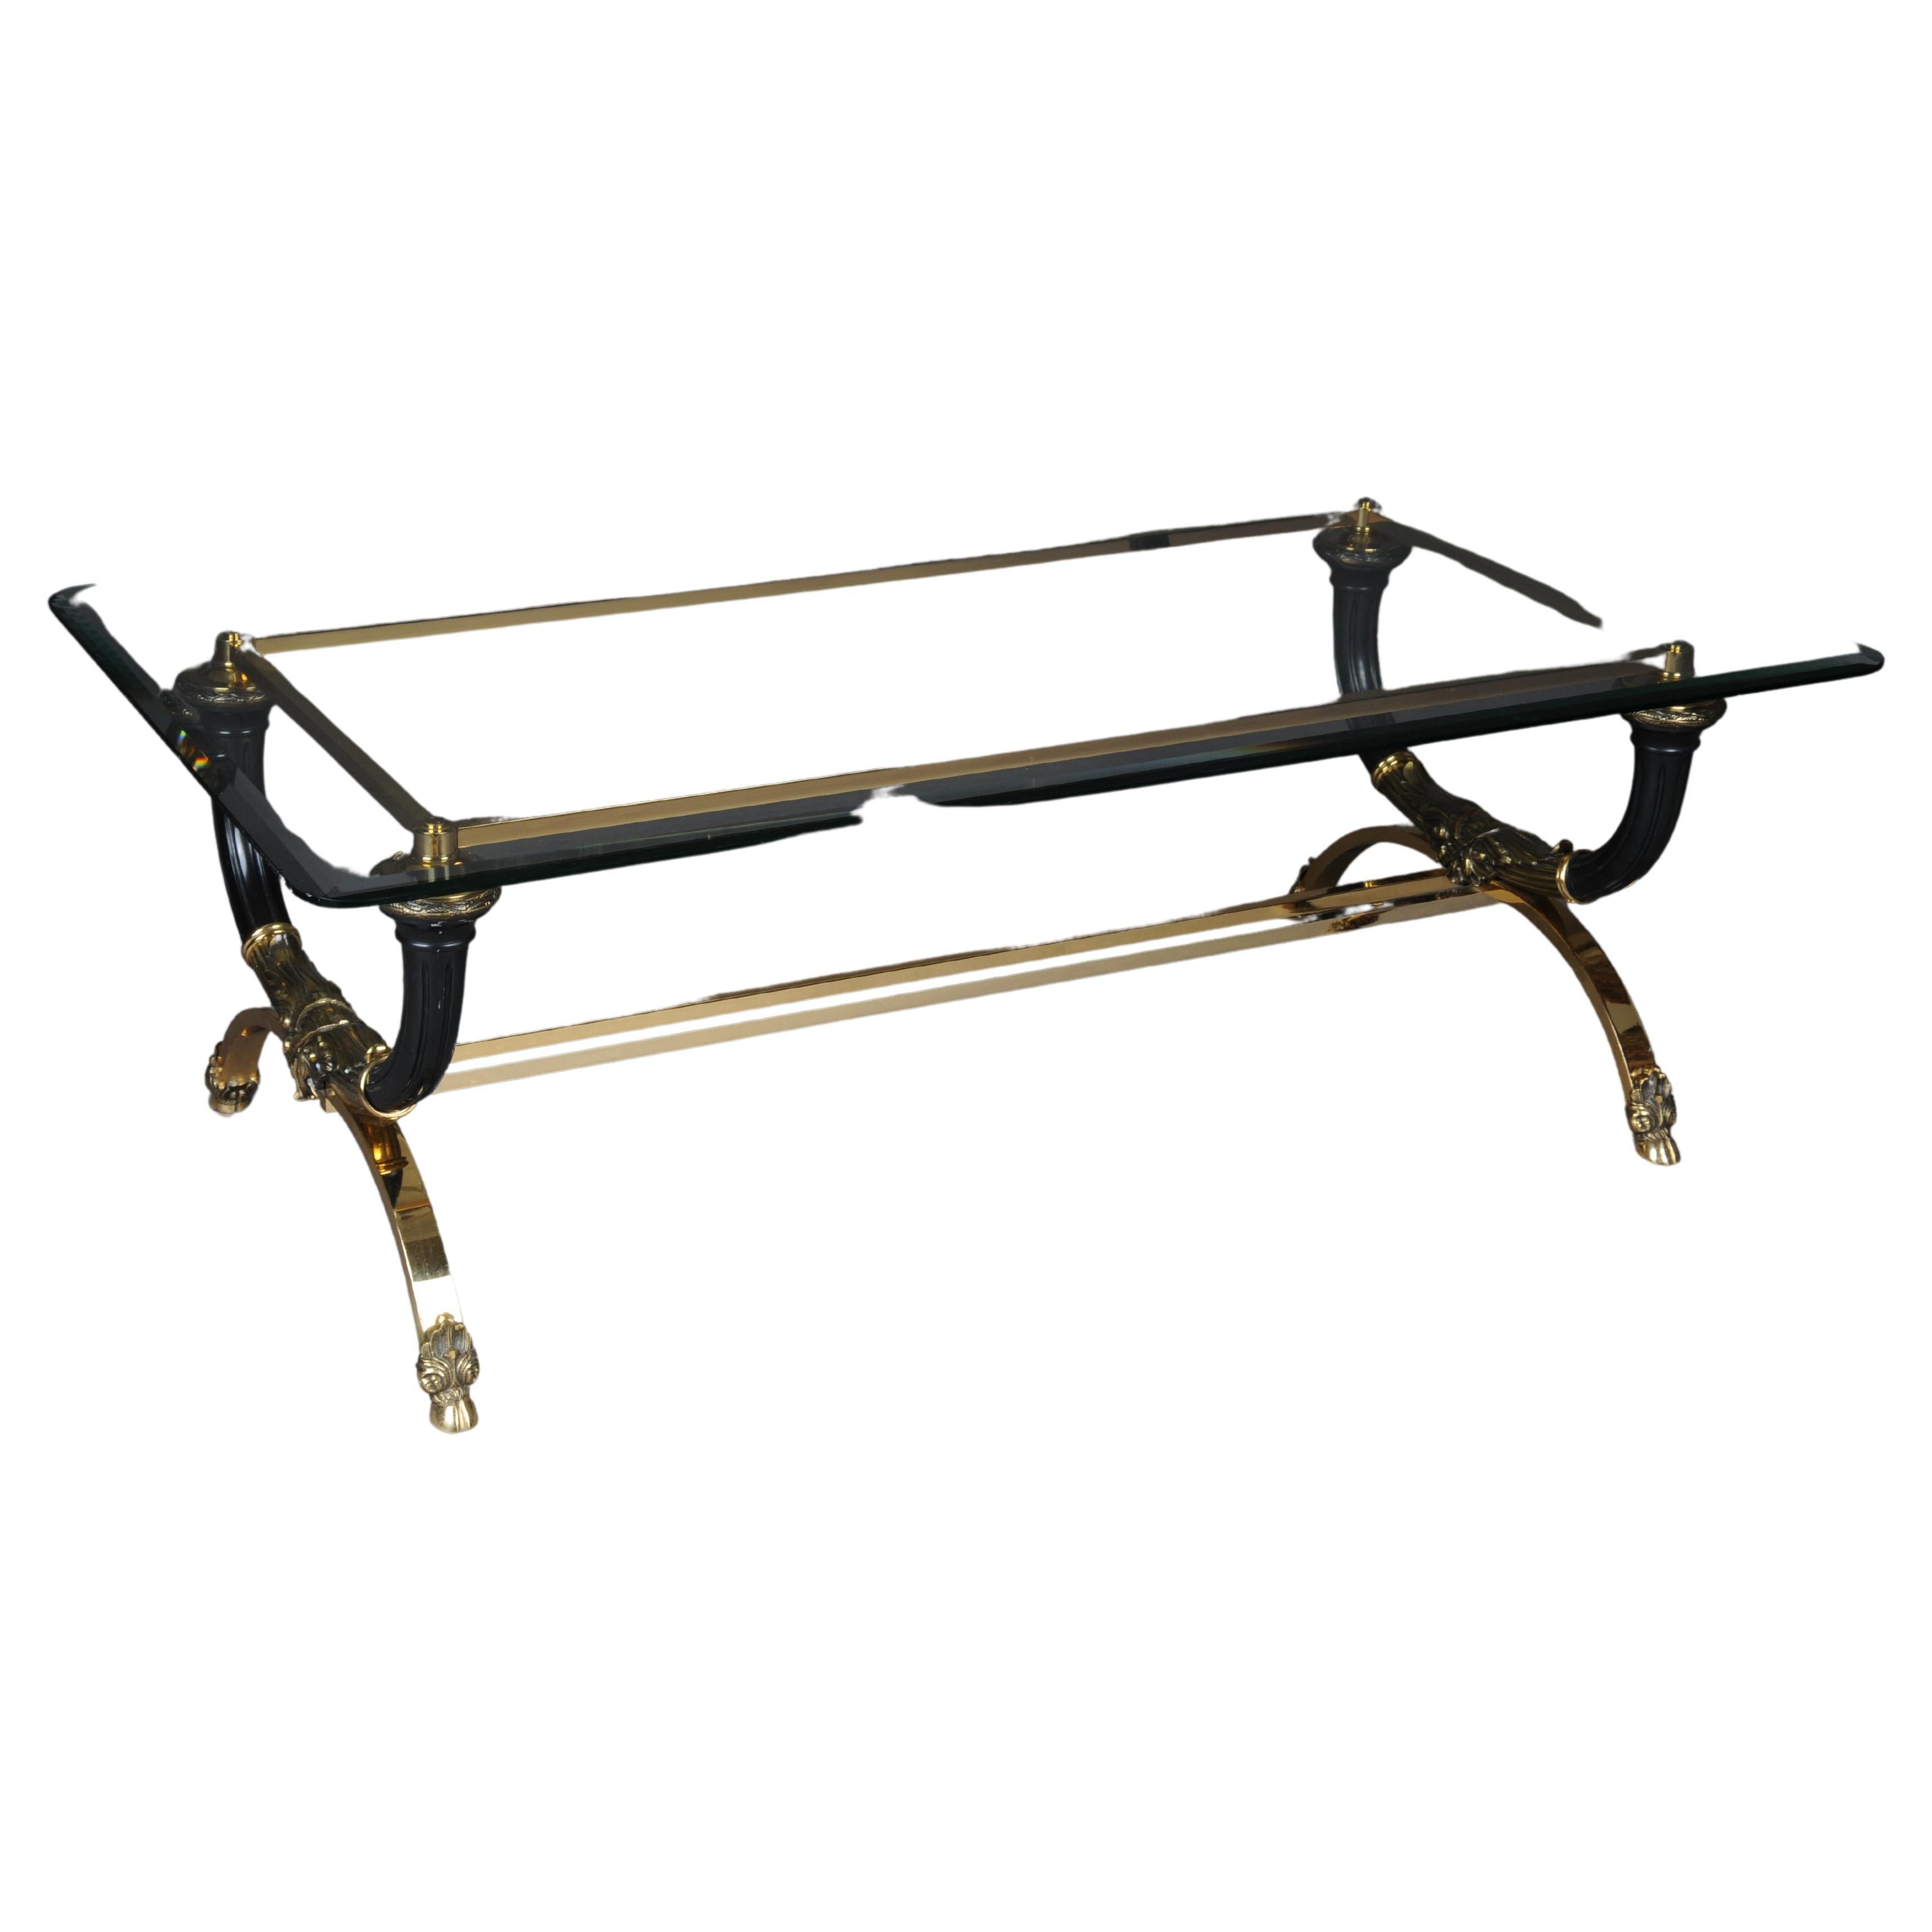 Empire designer coffee table, gold plated brass

high quality coffee table made of polished brass in neoclassical style. Symmetrically curved legs connected with a double-rowed center bar. Legs ending in hooves. Above black grooved cornucopiae.